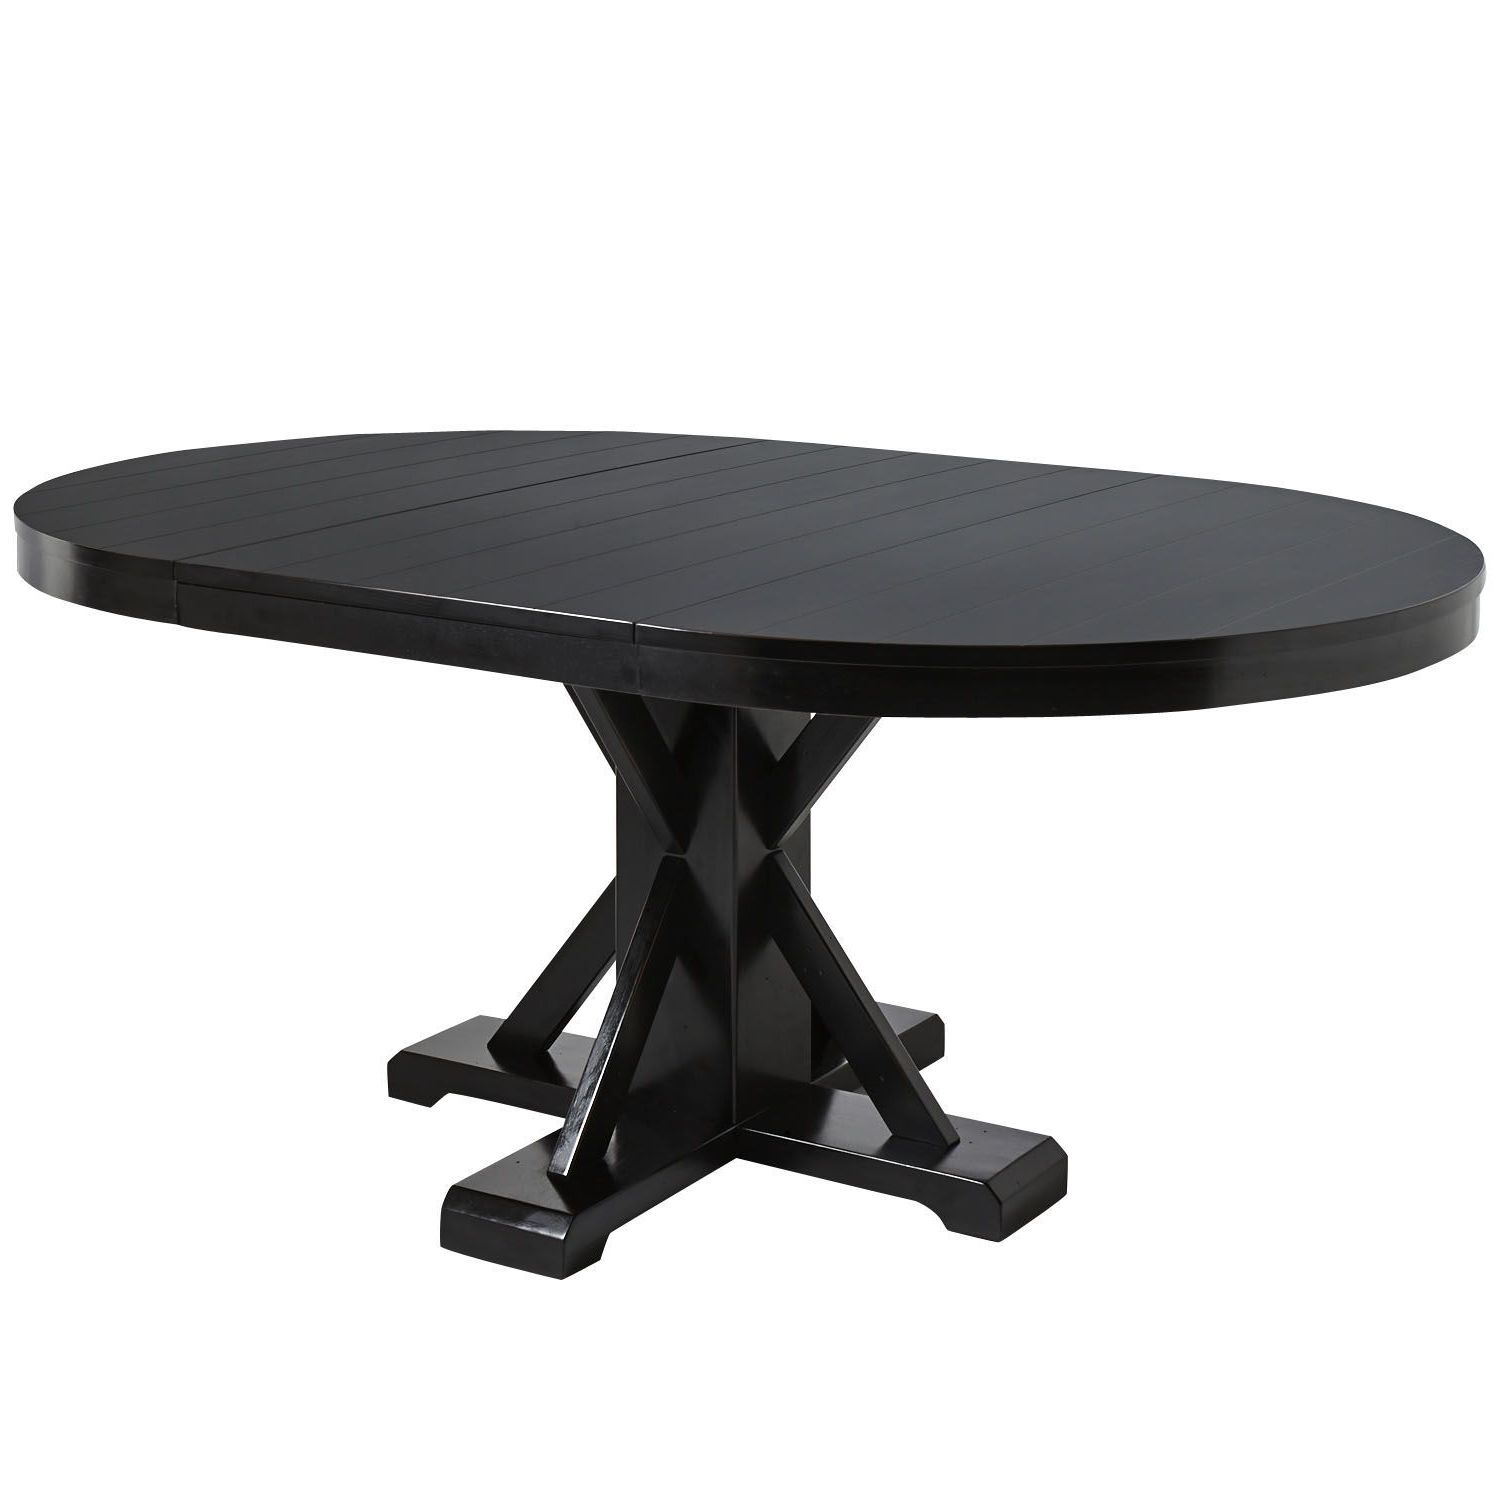 Nolan Round Pedestal Dining Tables Pertaining To Famous Nolan Extension Round Dining Table – Rubbed Black (View 11 of 25)